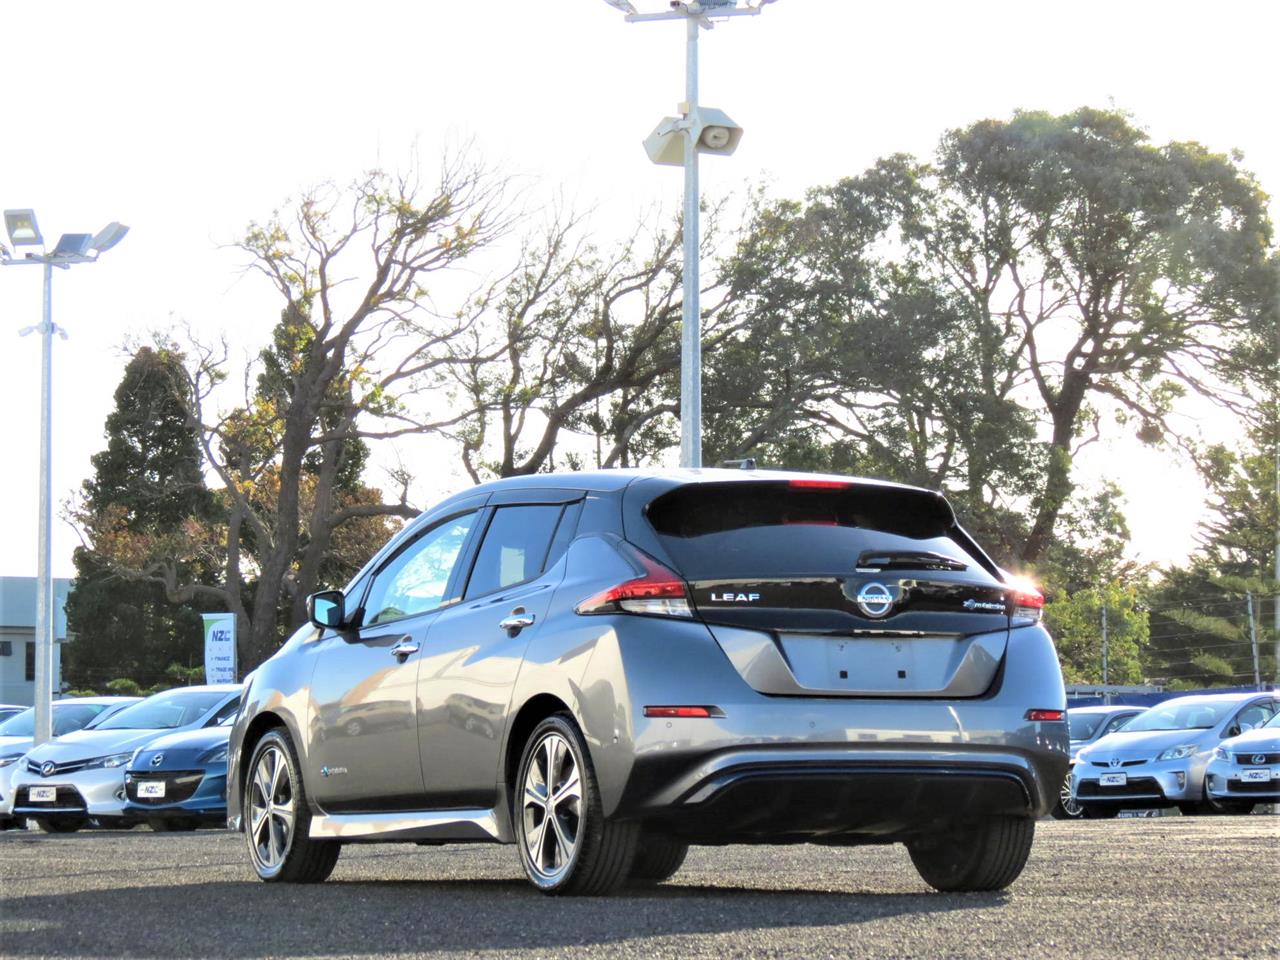 2018 Nissan Leaf only $61 weekly